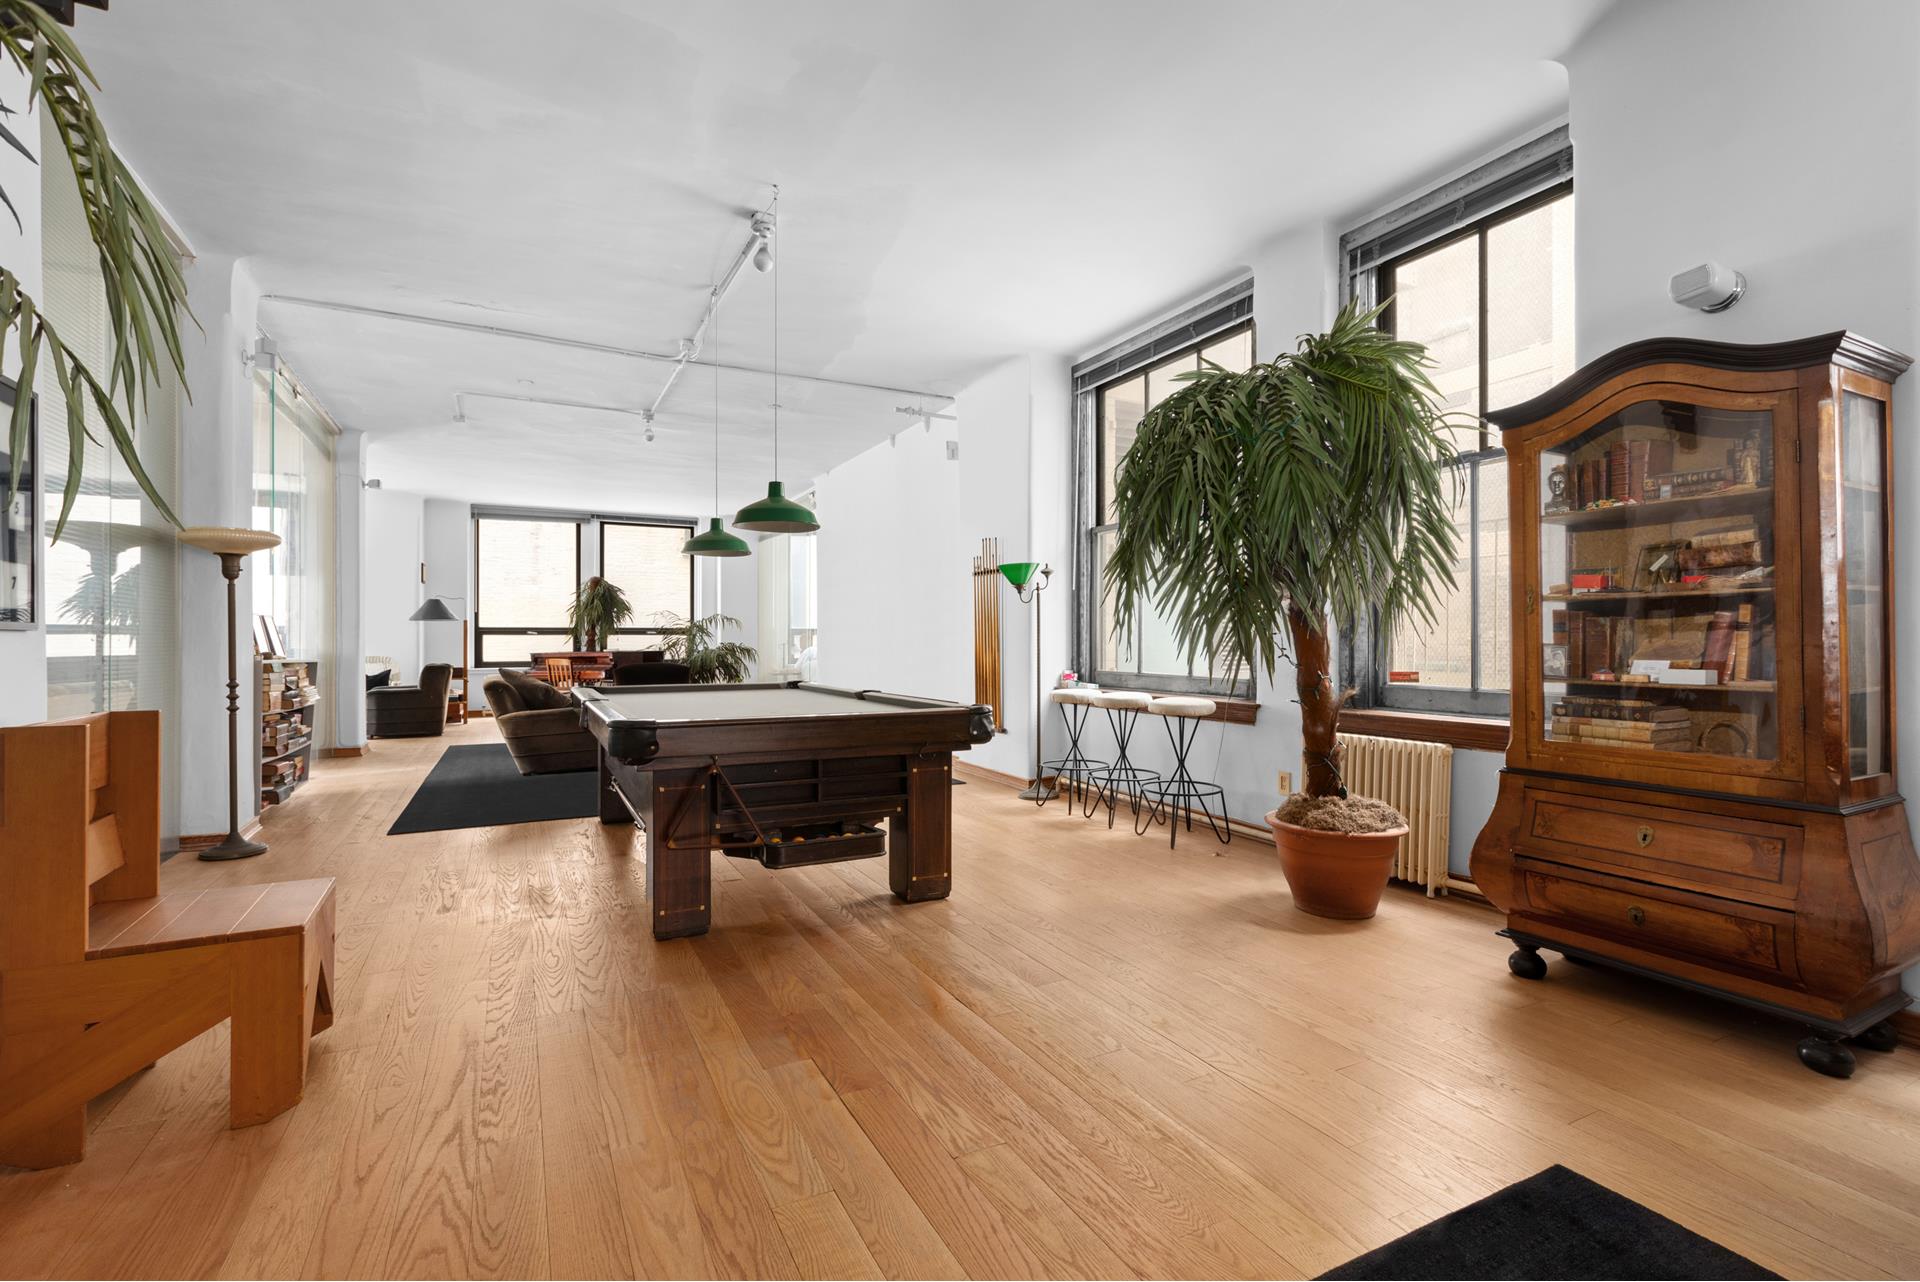 50 Pine Street 10, Financial District, Downtown, NYC - 2 Bedrooms  
1 Bathrooms  
6 Rooms - 